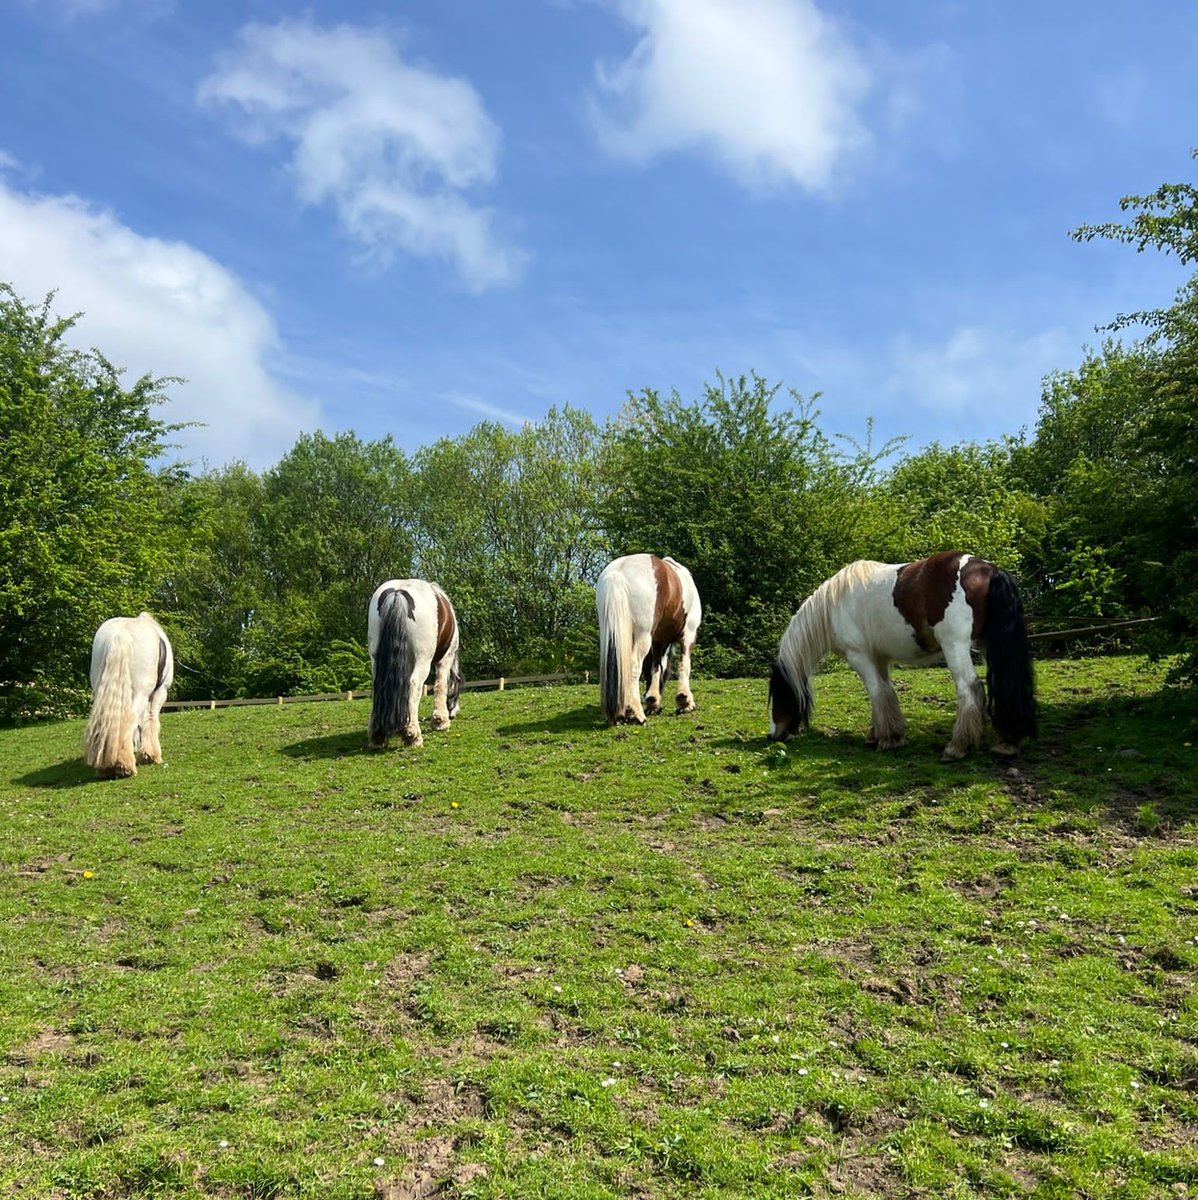 We hope that everyone is having a great week so far and enjoying this amazing weather! Our lovely horses are definitely making the most of the sun! 🥰☀️🐴❤️